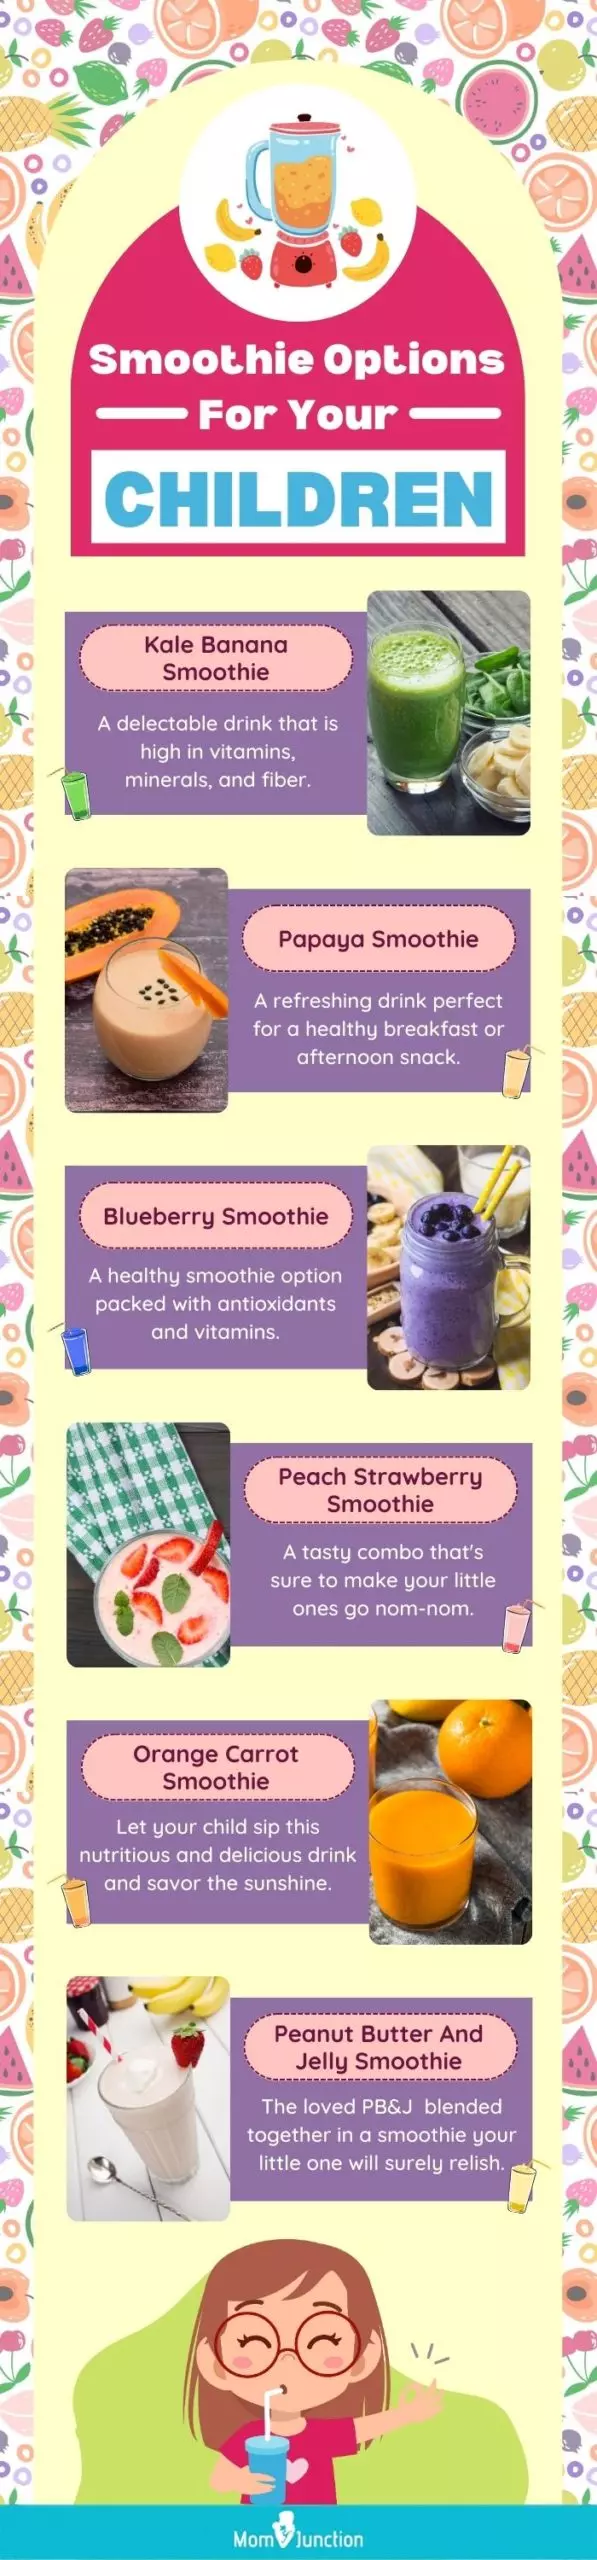 smoothie options for your children (infographic)